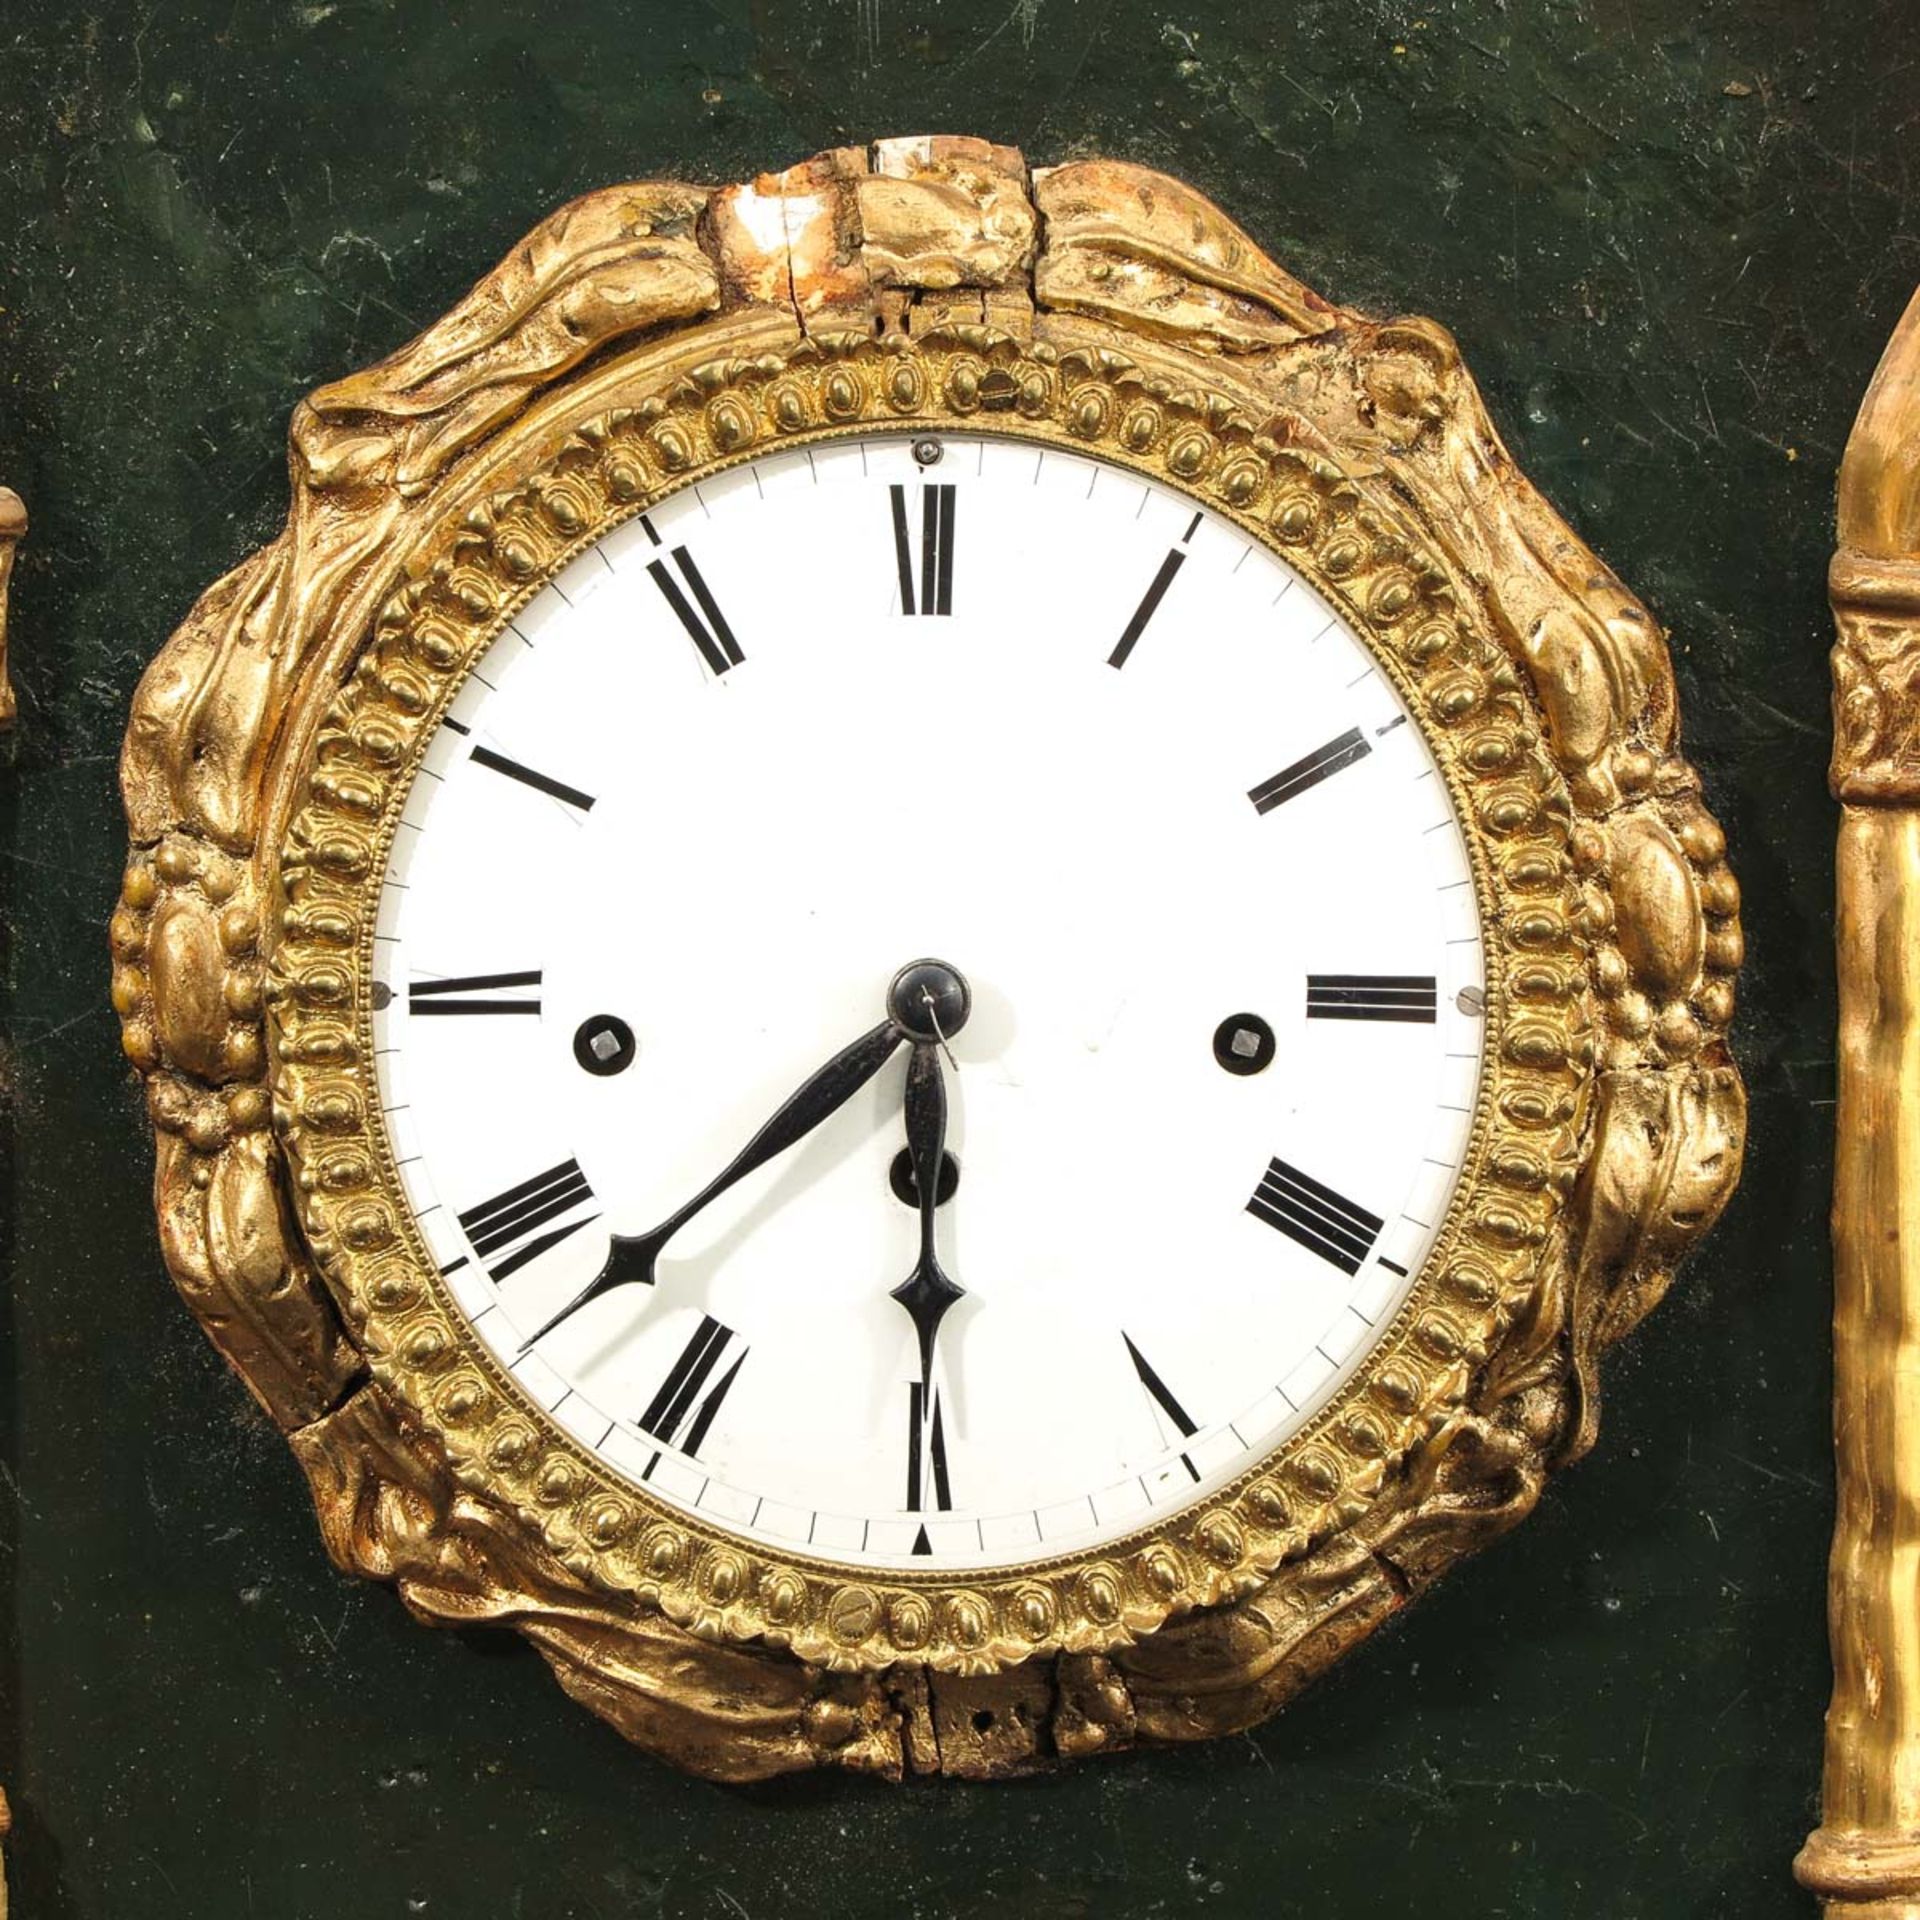 A 19th Century Viennese Musical Wall Clock - Image 5 of 10